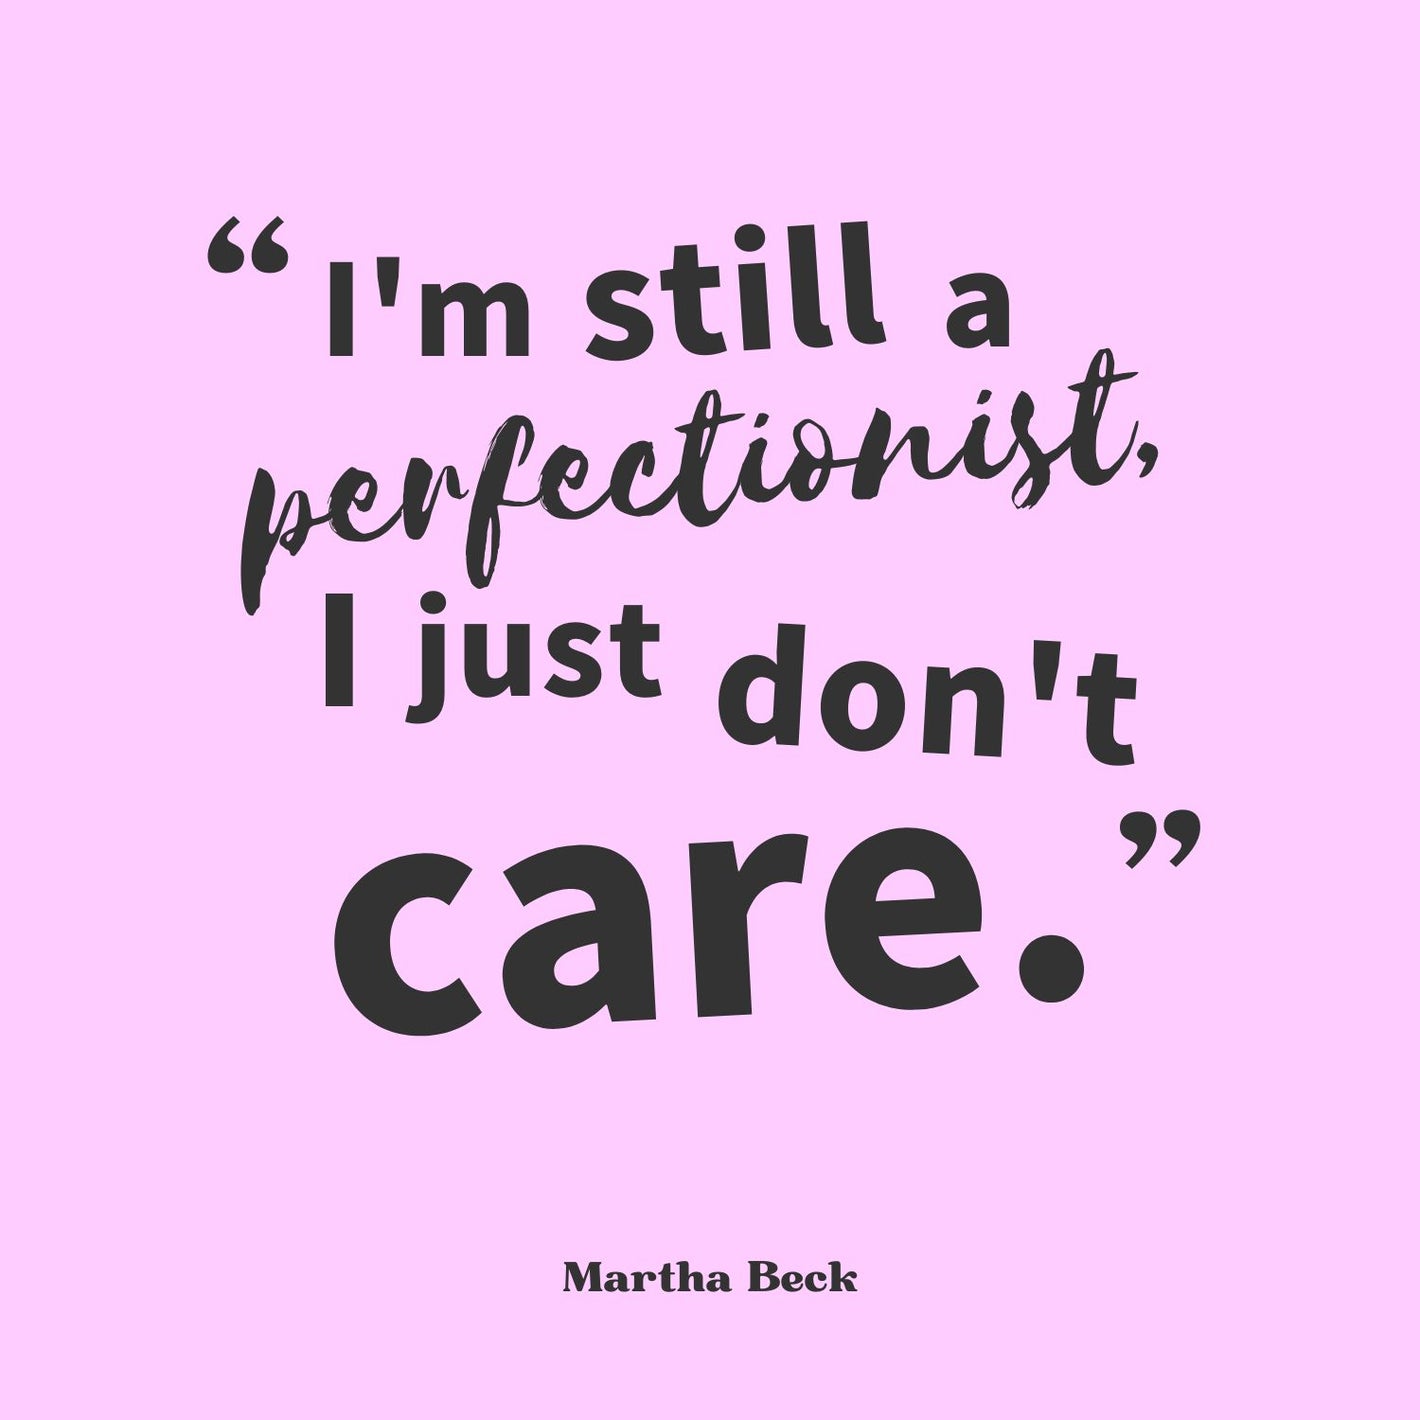 Funny quote by Martha Beck about perfectionism: I’m still a perfectionist. I just don’t care. Black text on pink.